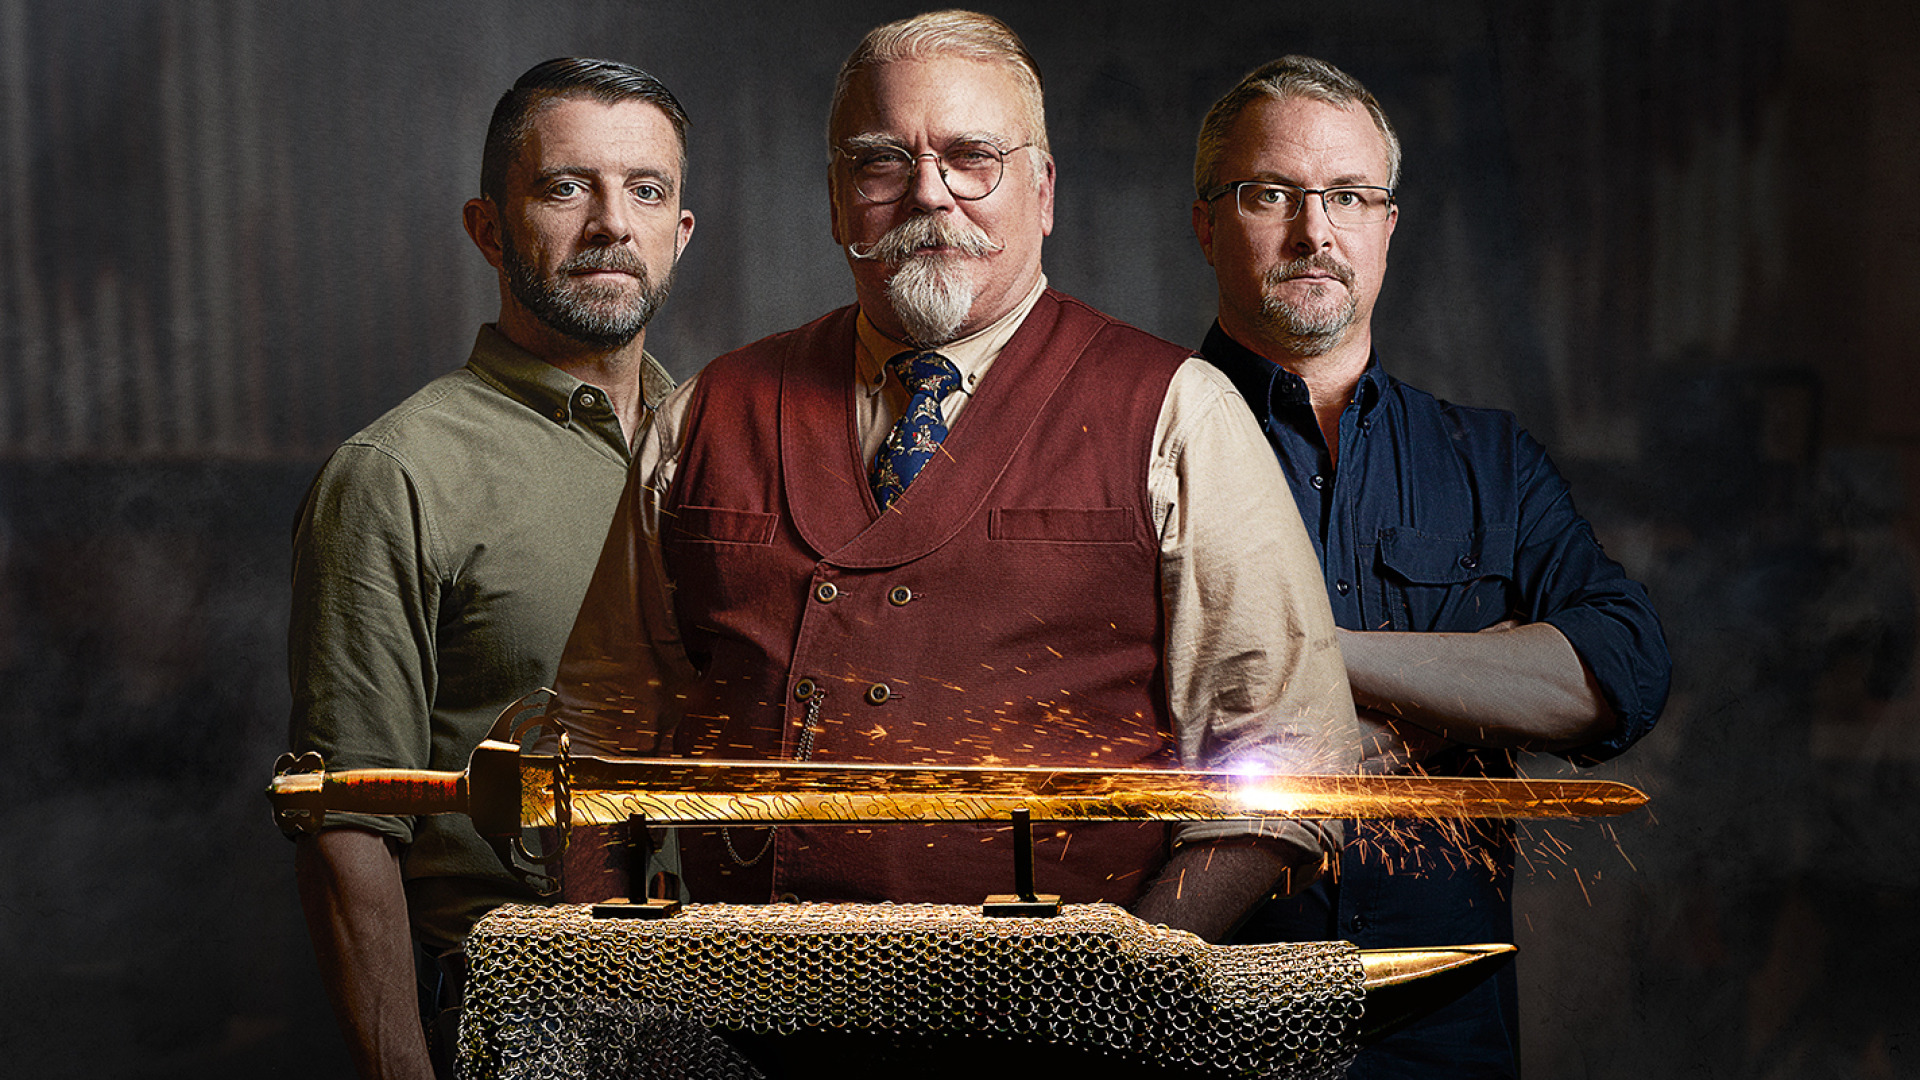 Show Forged in Fire: Beat the Judges